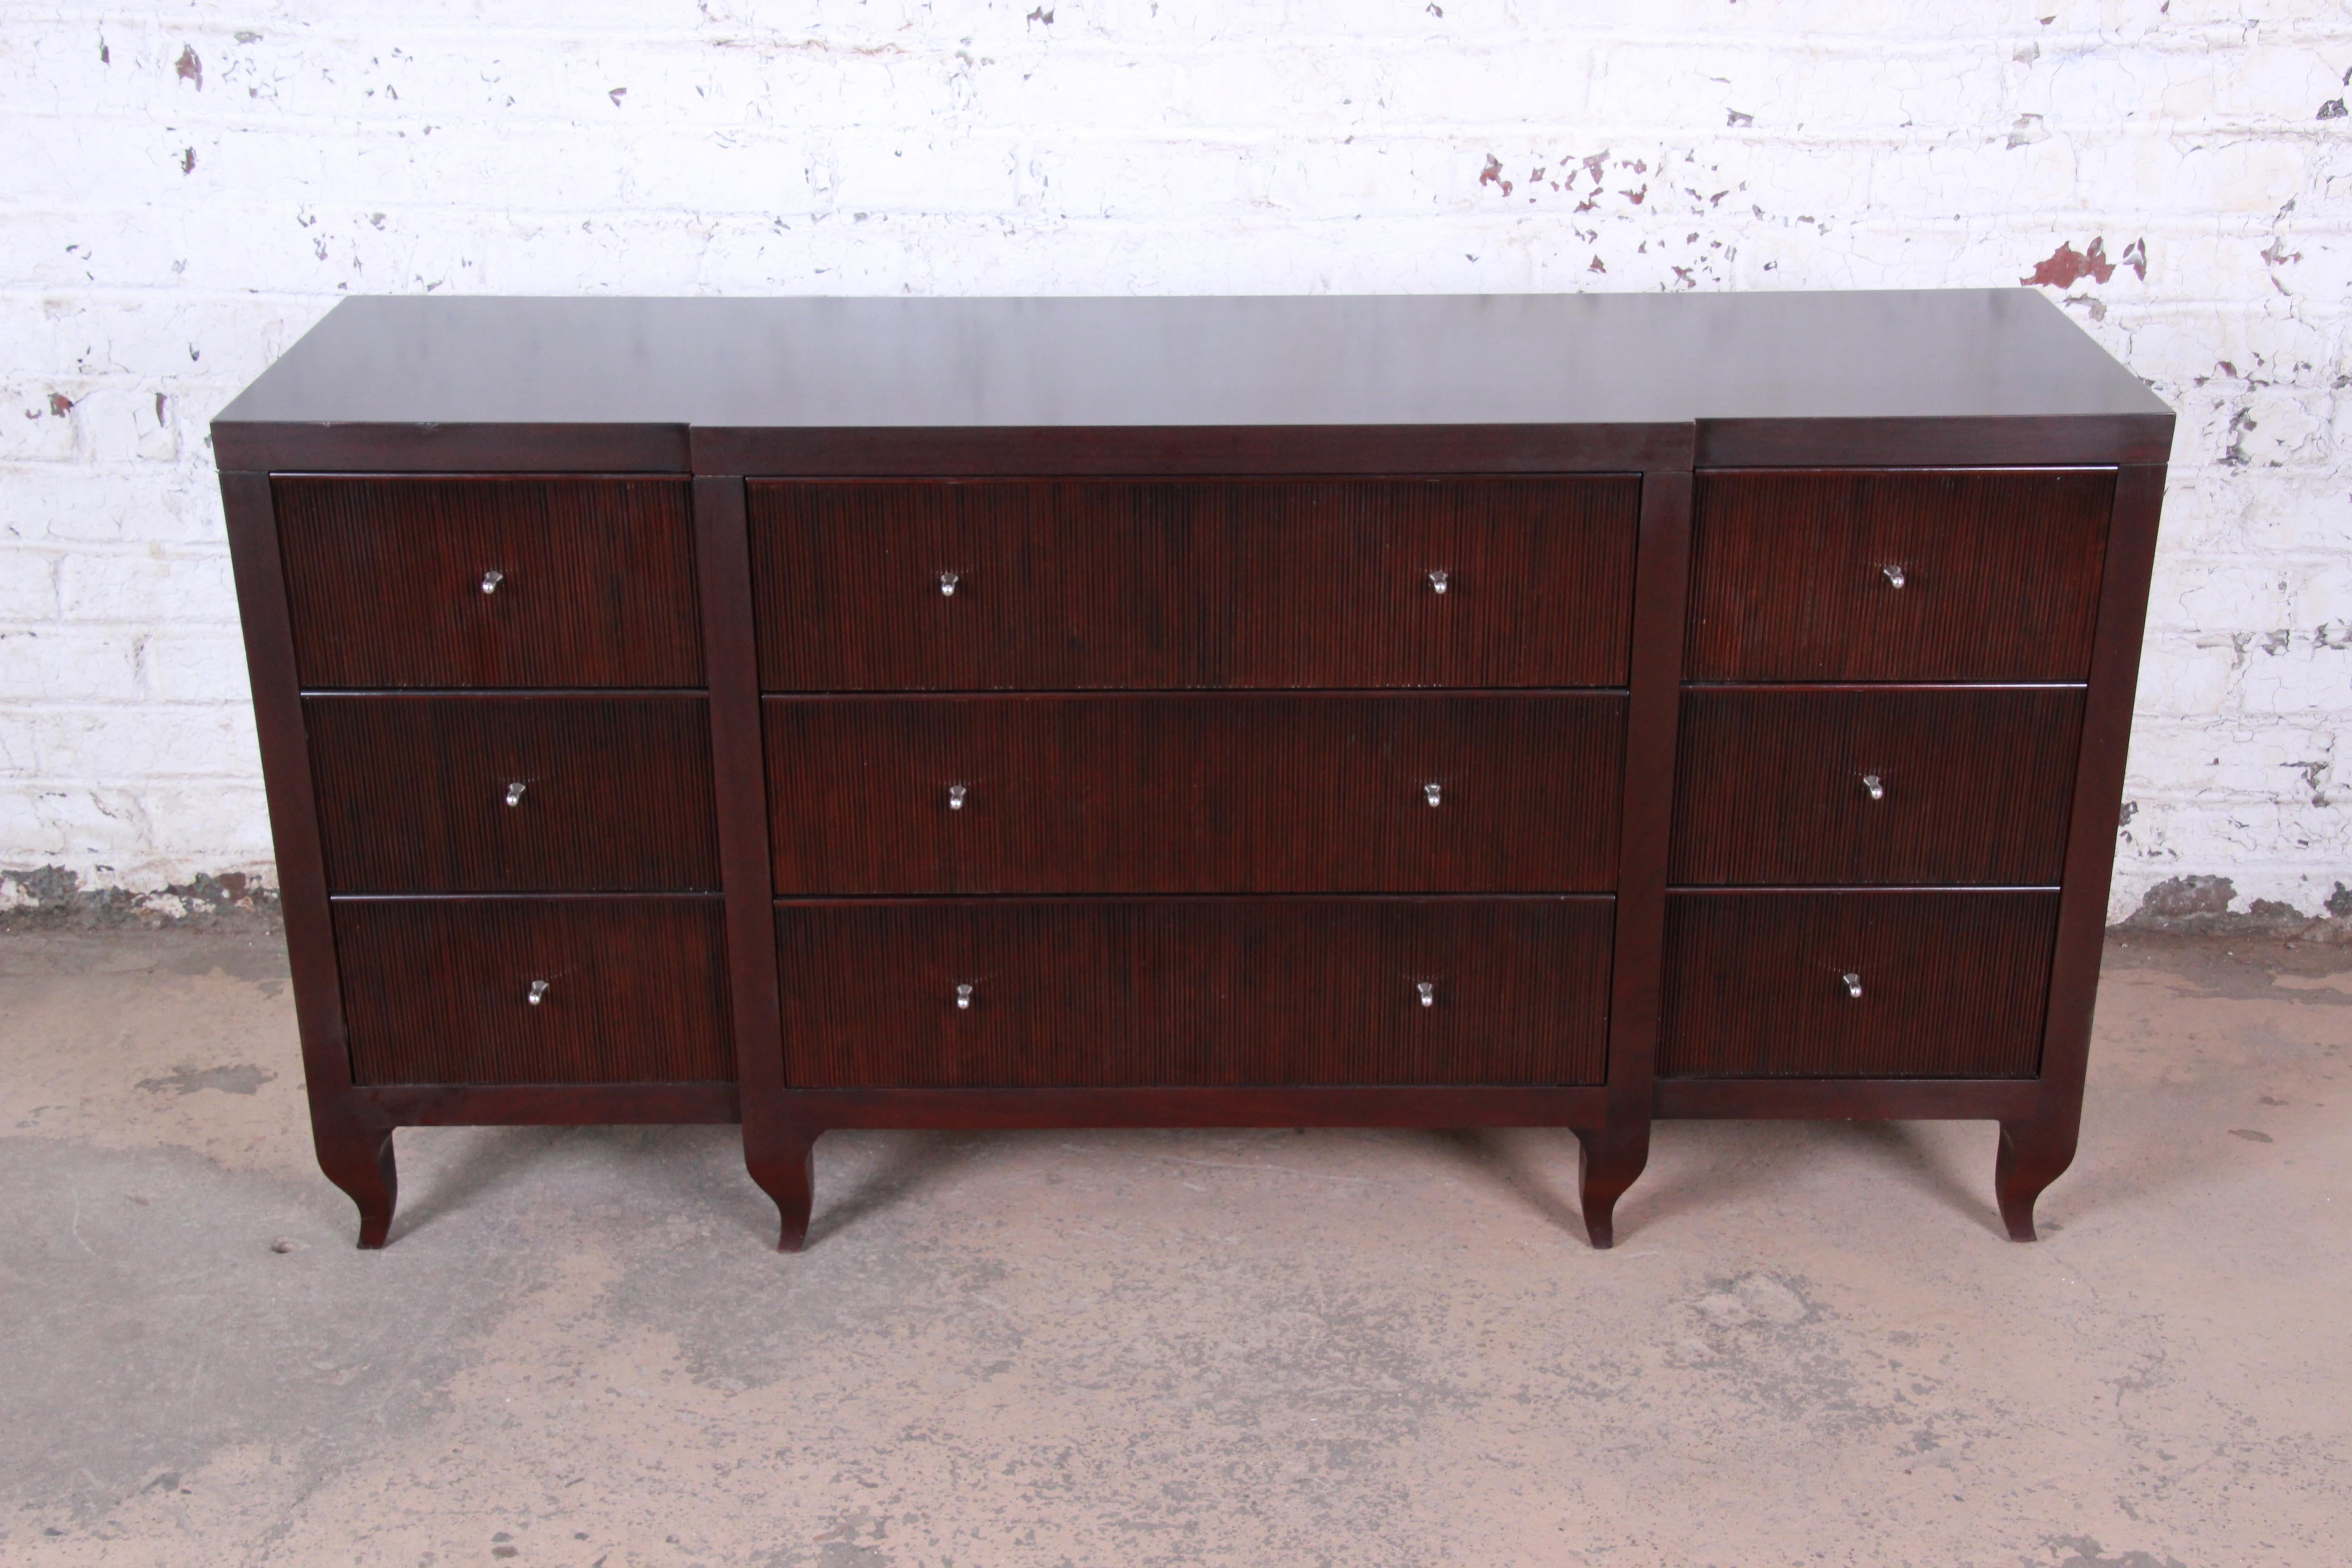 An exceptional dark mahogany triple dresser or credenza designed by Barbara Barry for Baker Furniture. The dresser features beautiful mahogany wood grain with a unique vertical fluted design on the drawer fronts. It offers ample storage, with nine